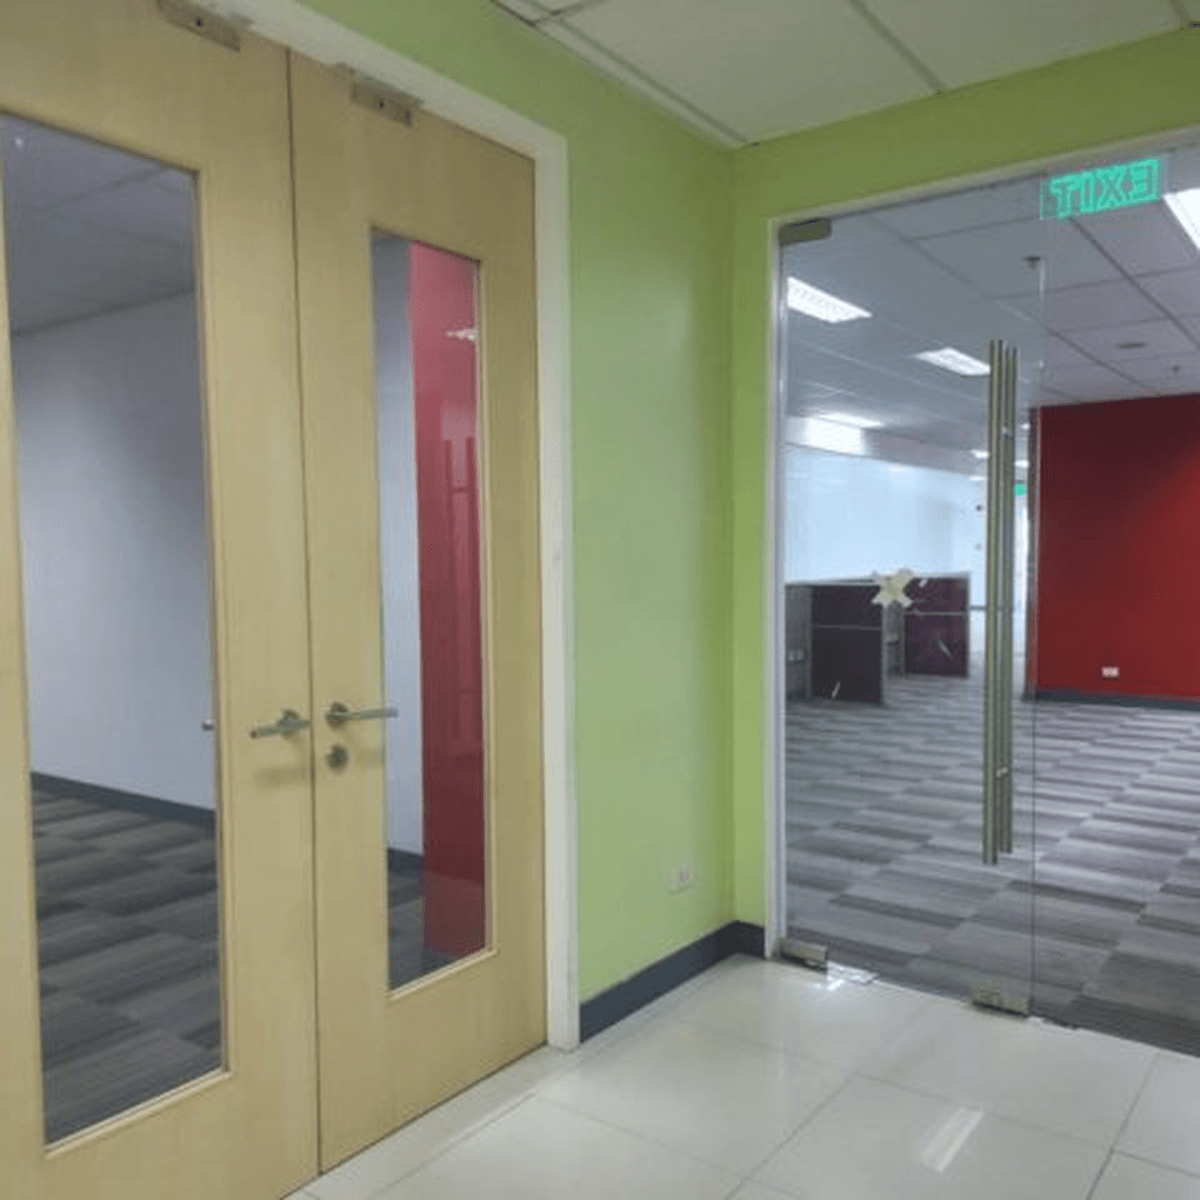 Office Space Rent Lease Mandaluyong City Manila 1300 sqm Fitted